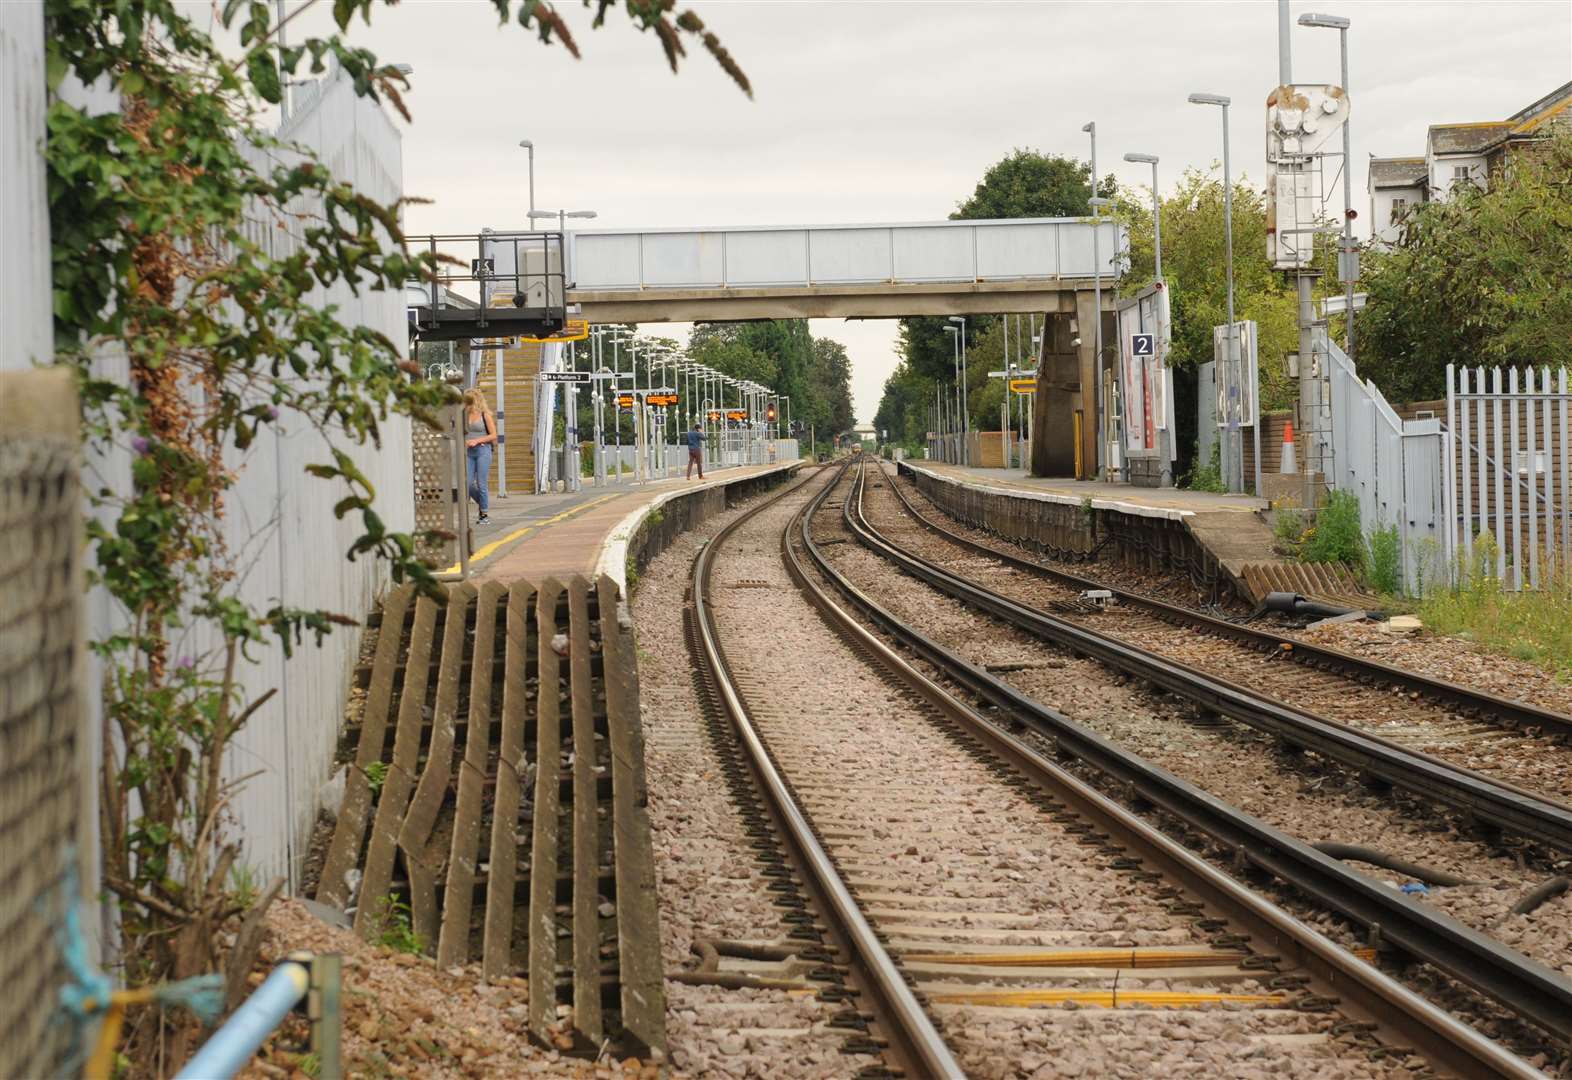 Gang Launched Homophobic Attack Then Threatened To Throw Teenager On Tracks At Rainham Station